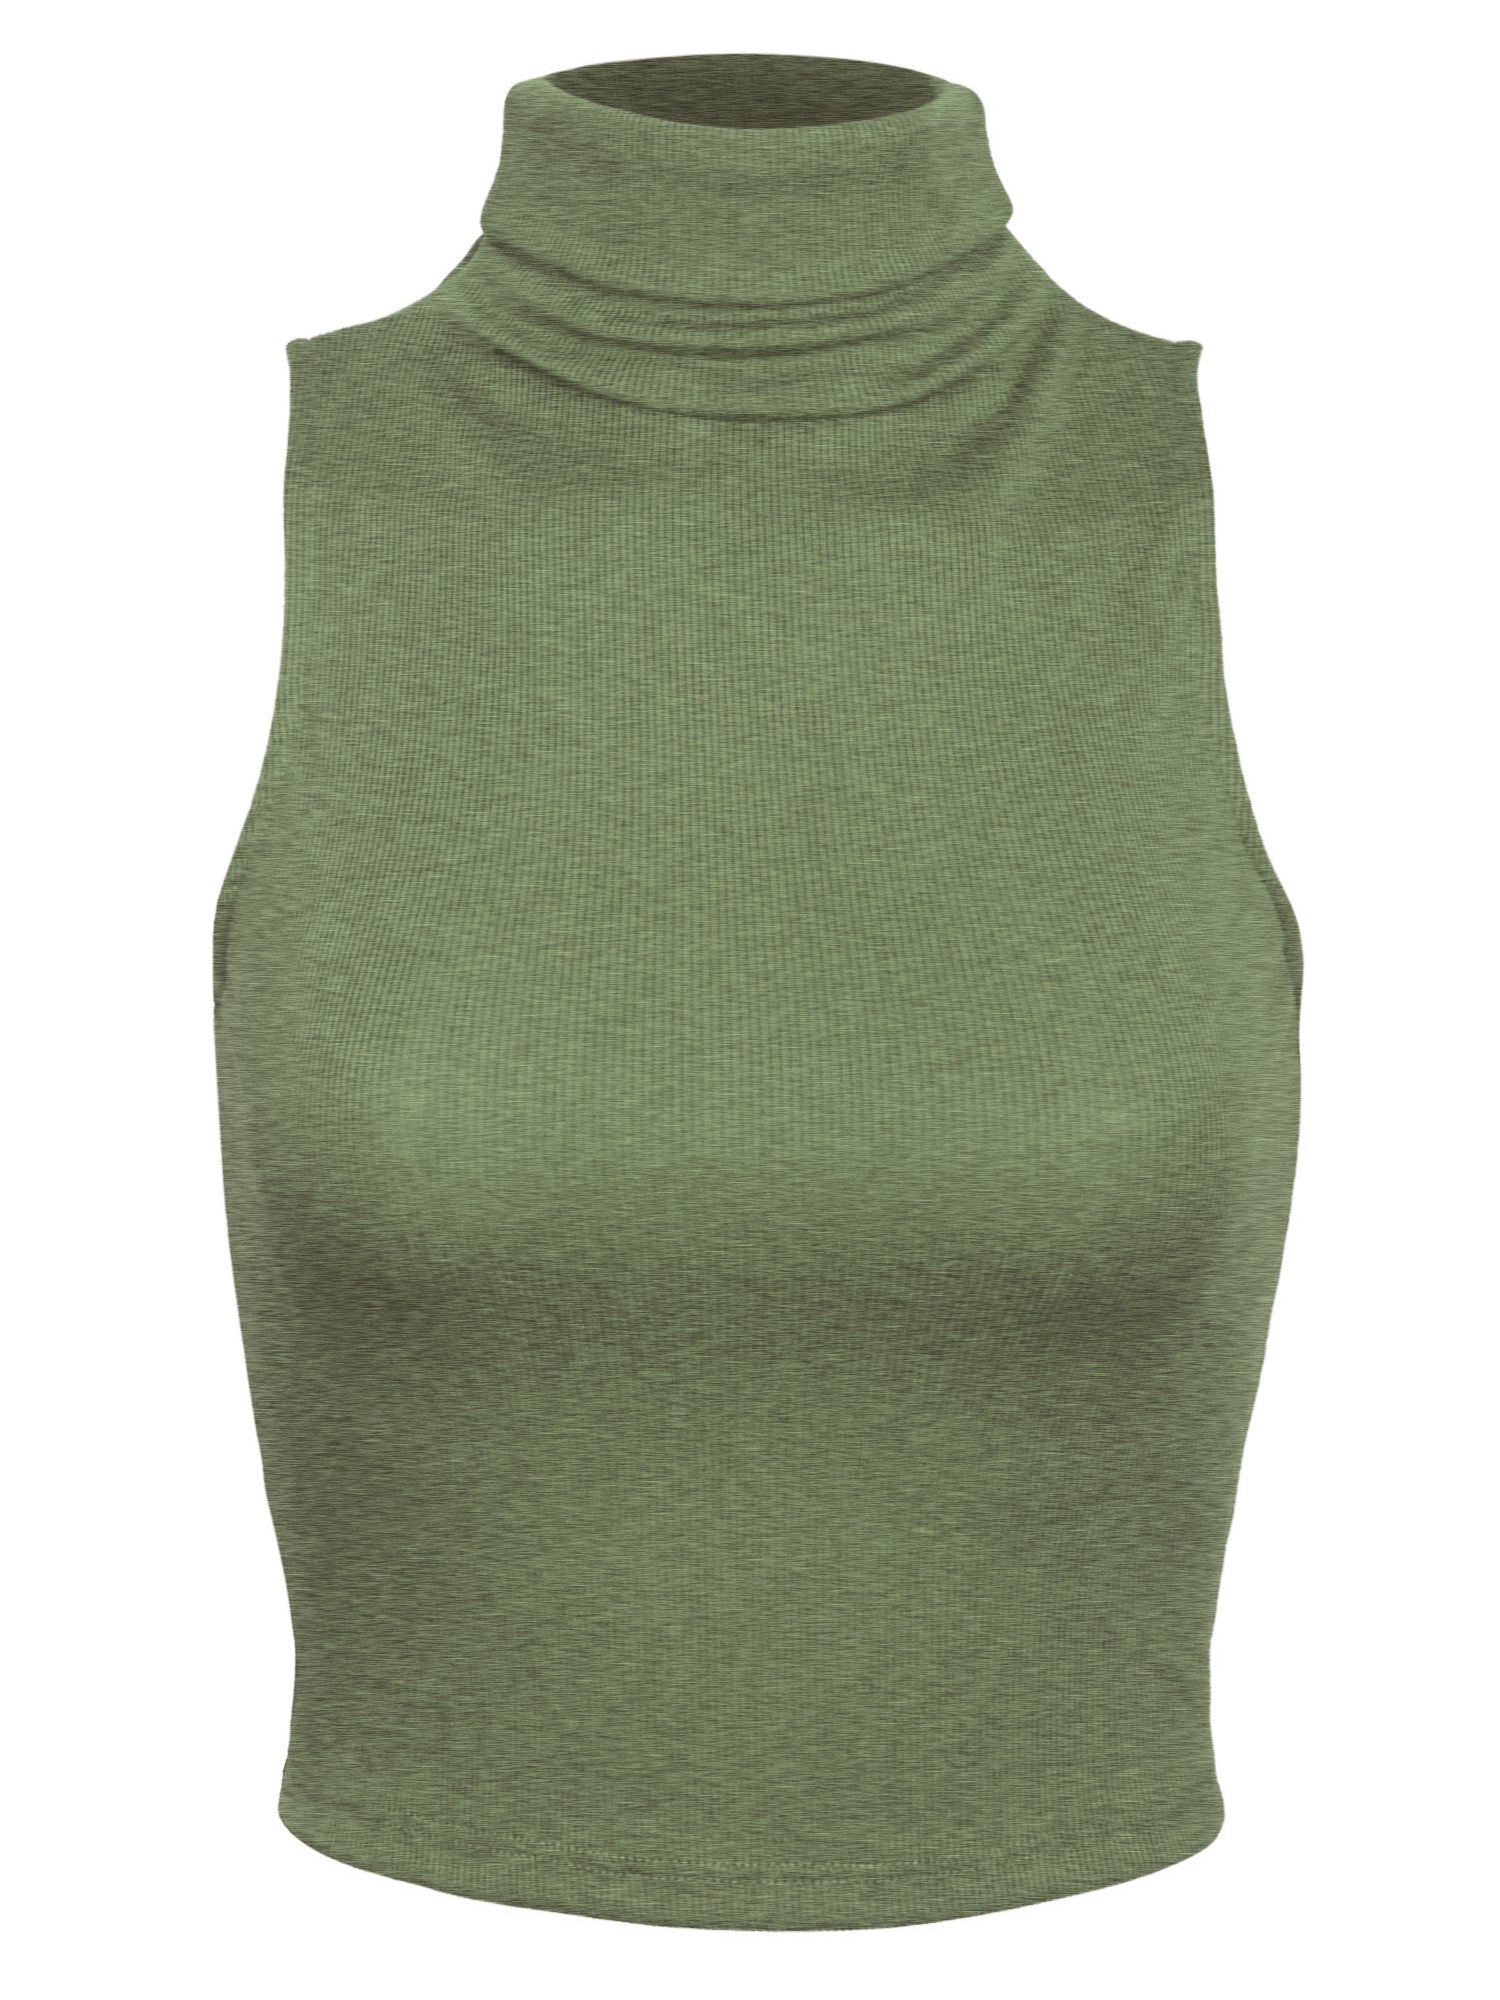 Women's Sleeveless Ribbed Turtleneck Crop Top Knit Made In USA - KOGMO